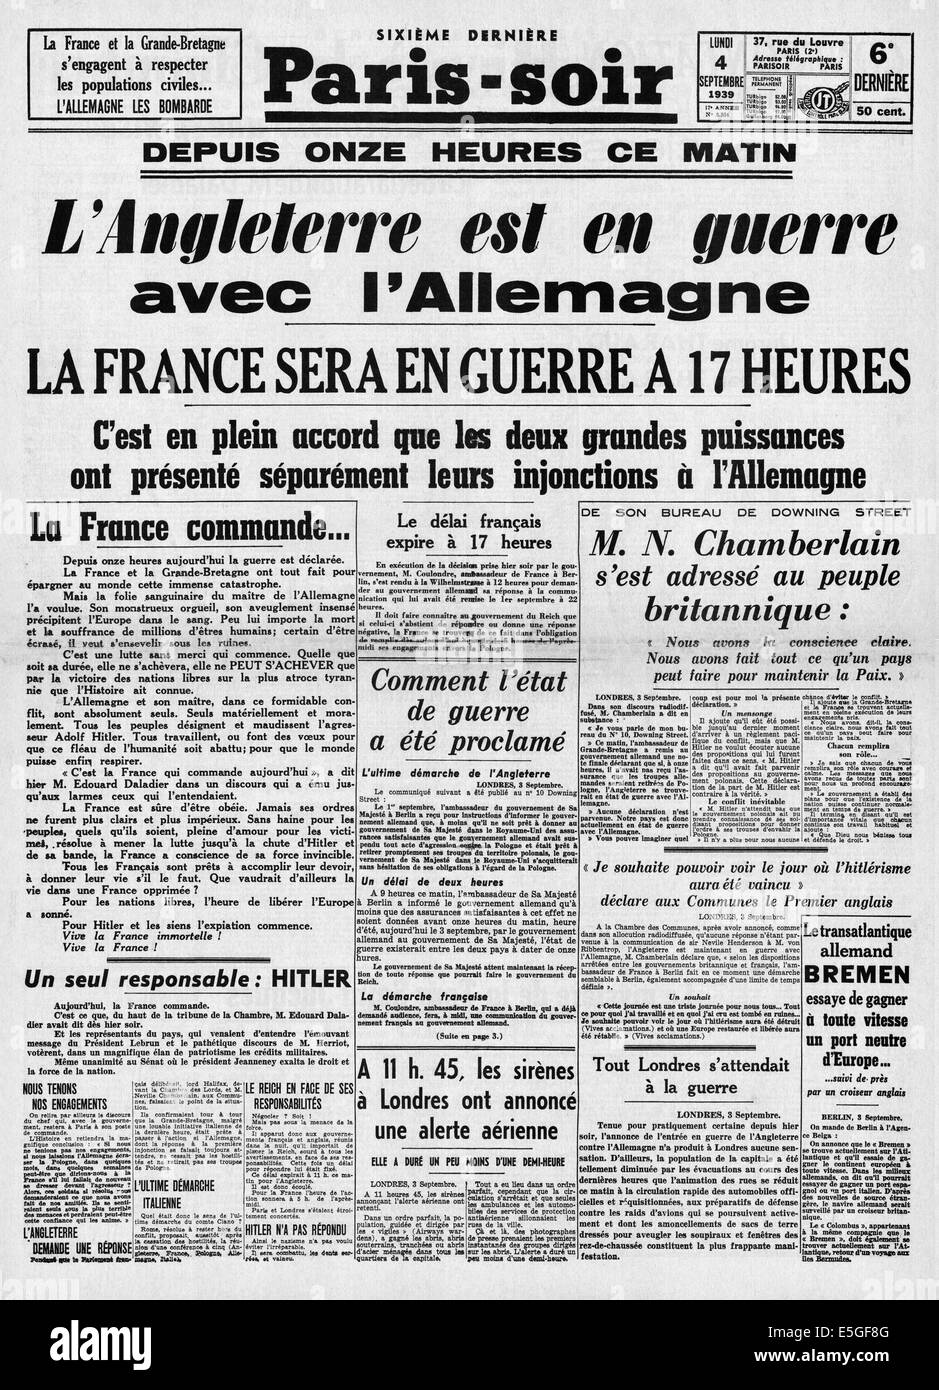 1939 Paris-Soir (France) front page reporting Britain and France declare war on Germany Stock Photo